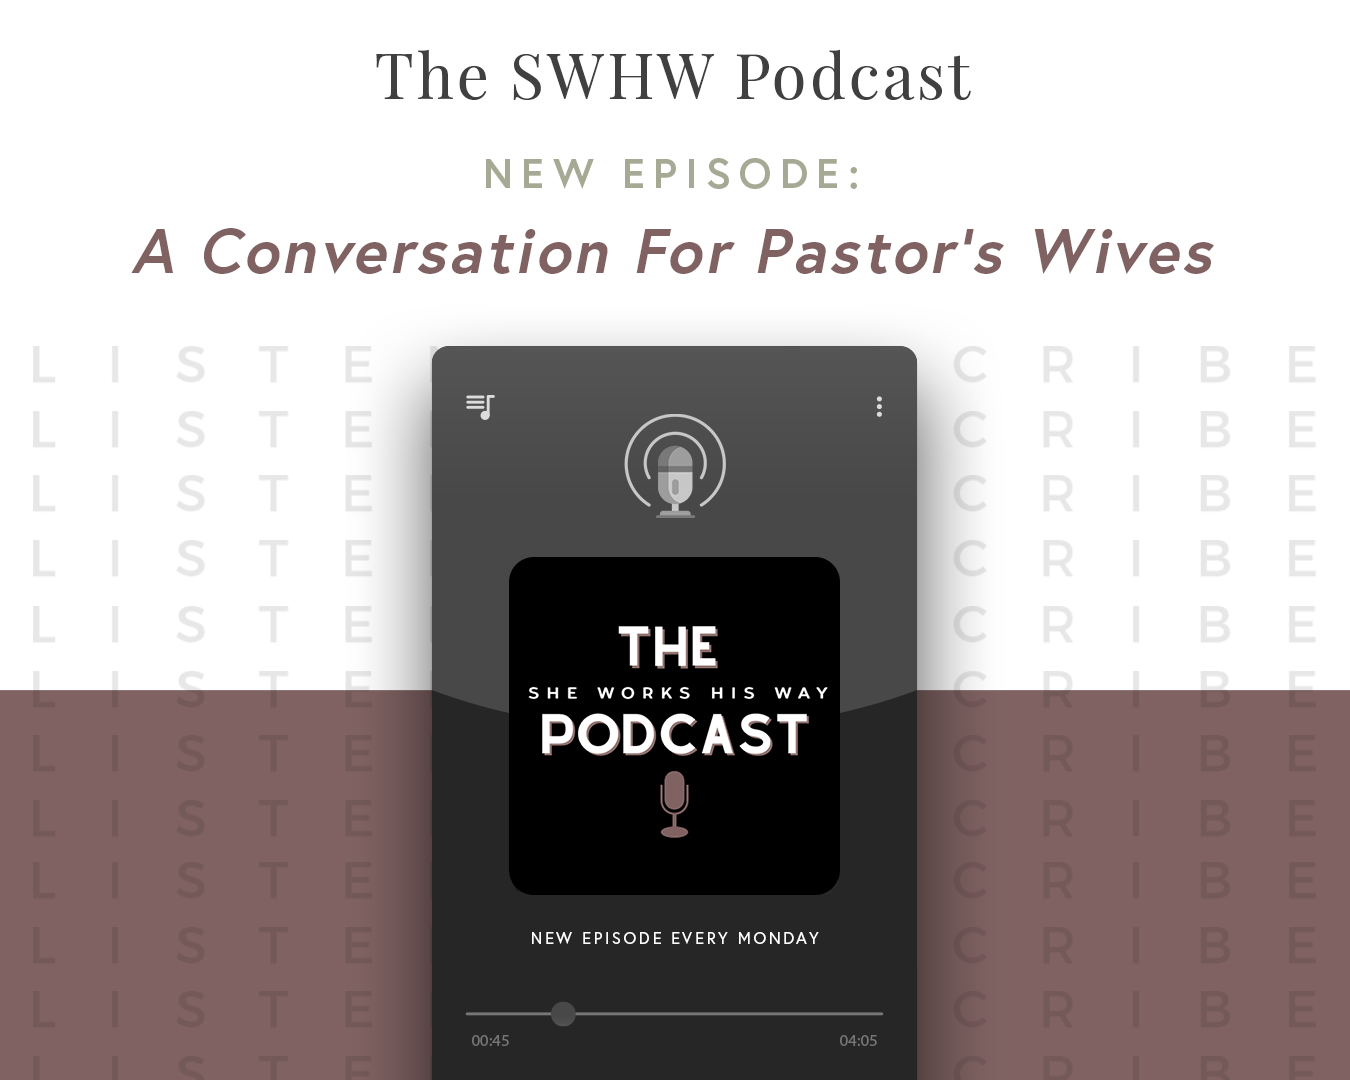 Episode 50 - A Conversation for Pastor's Wives - The She Works His Way Podcast